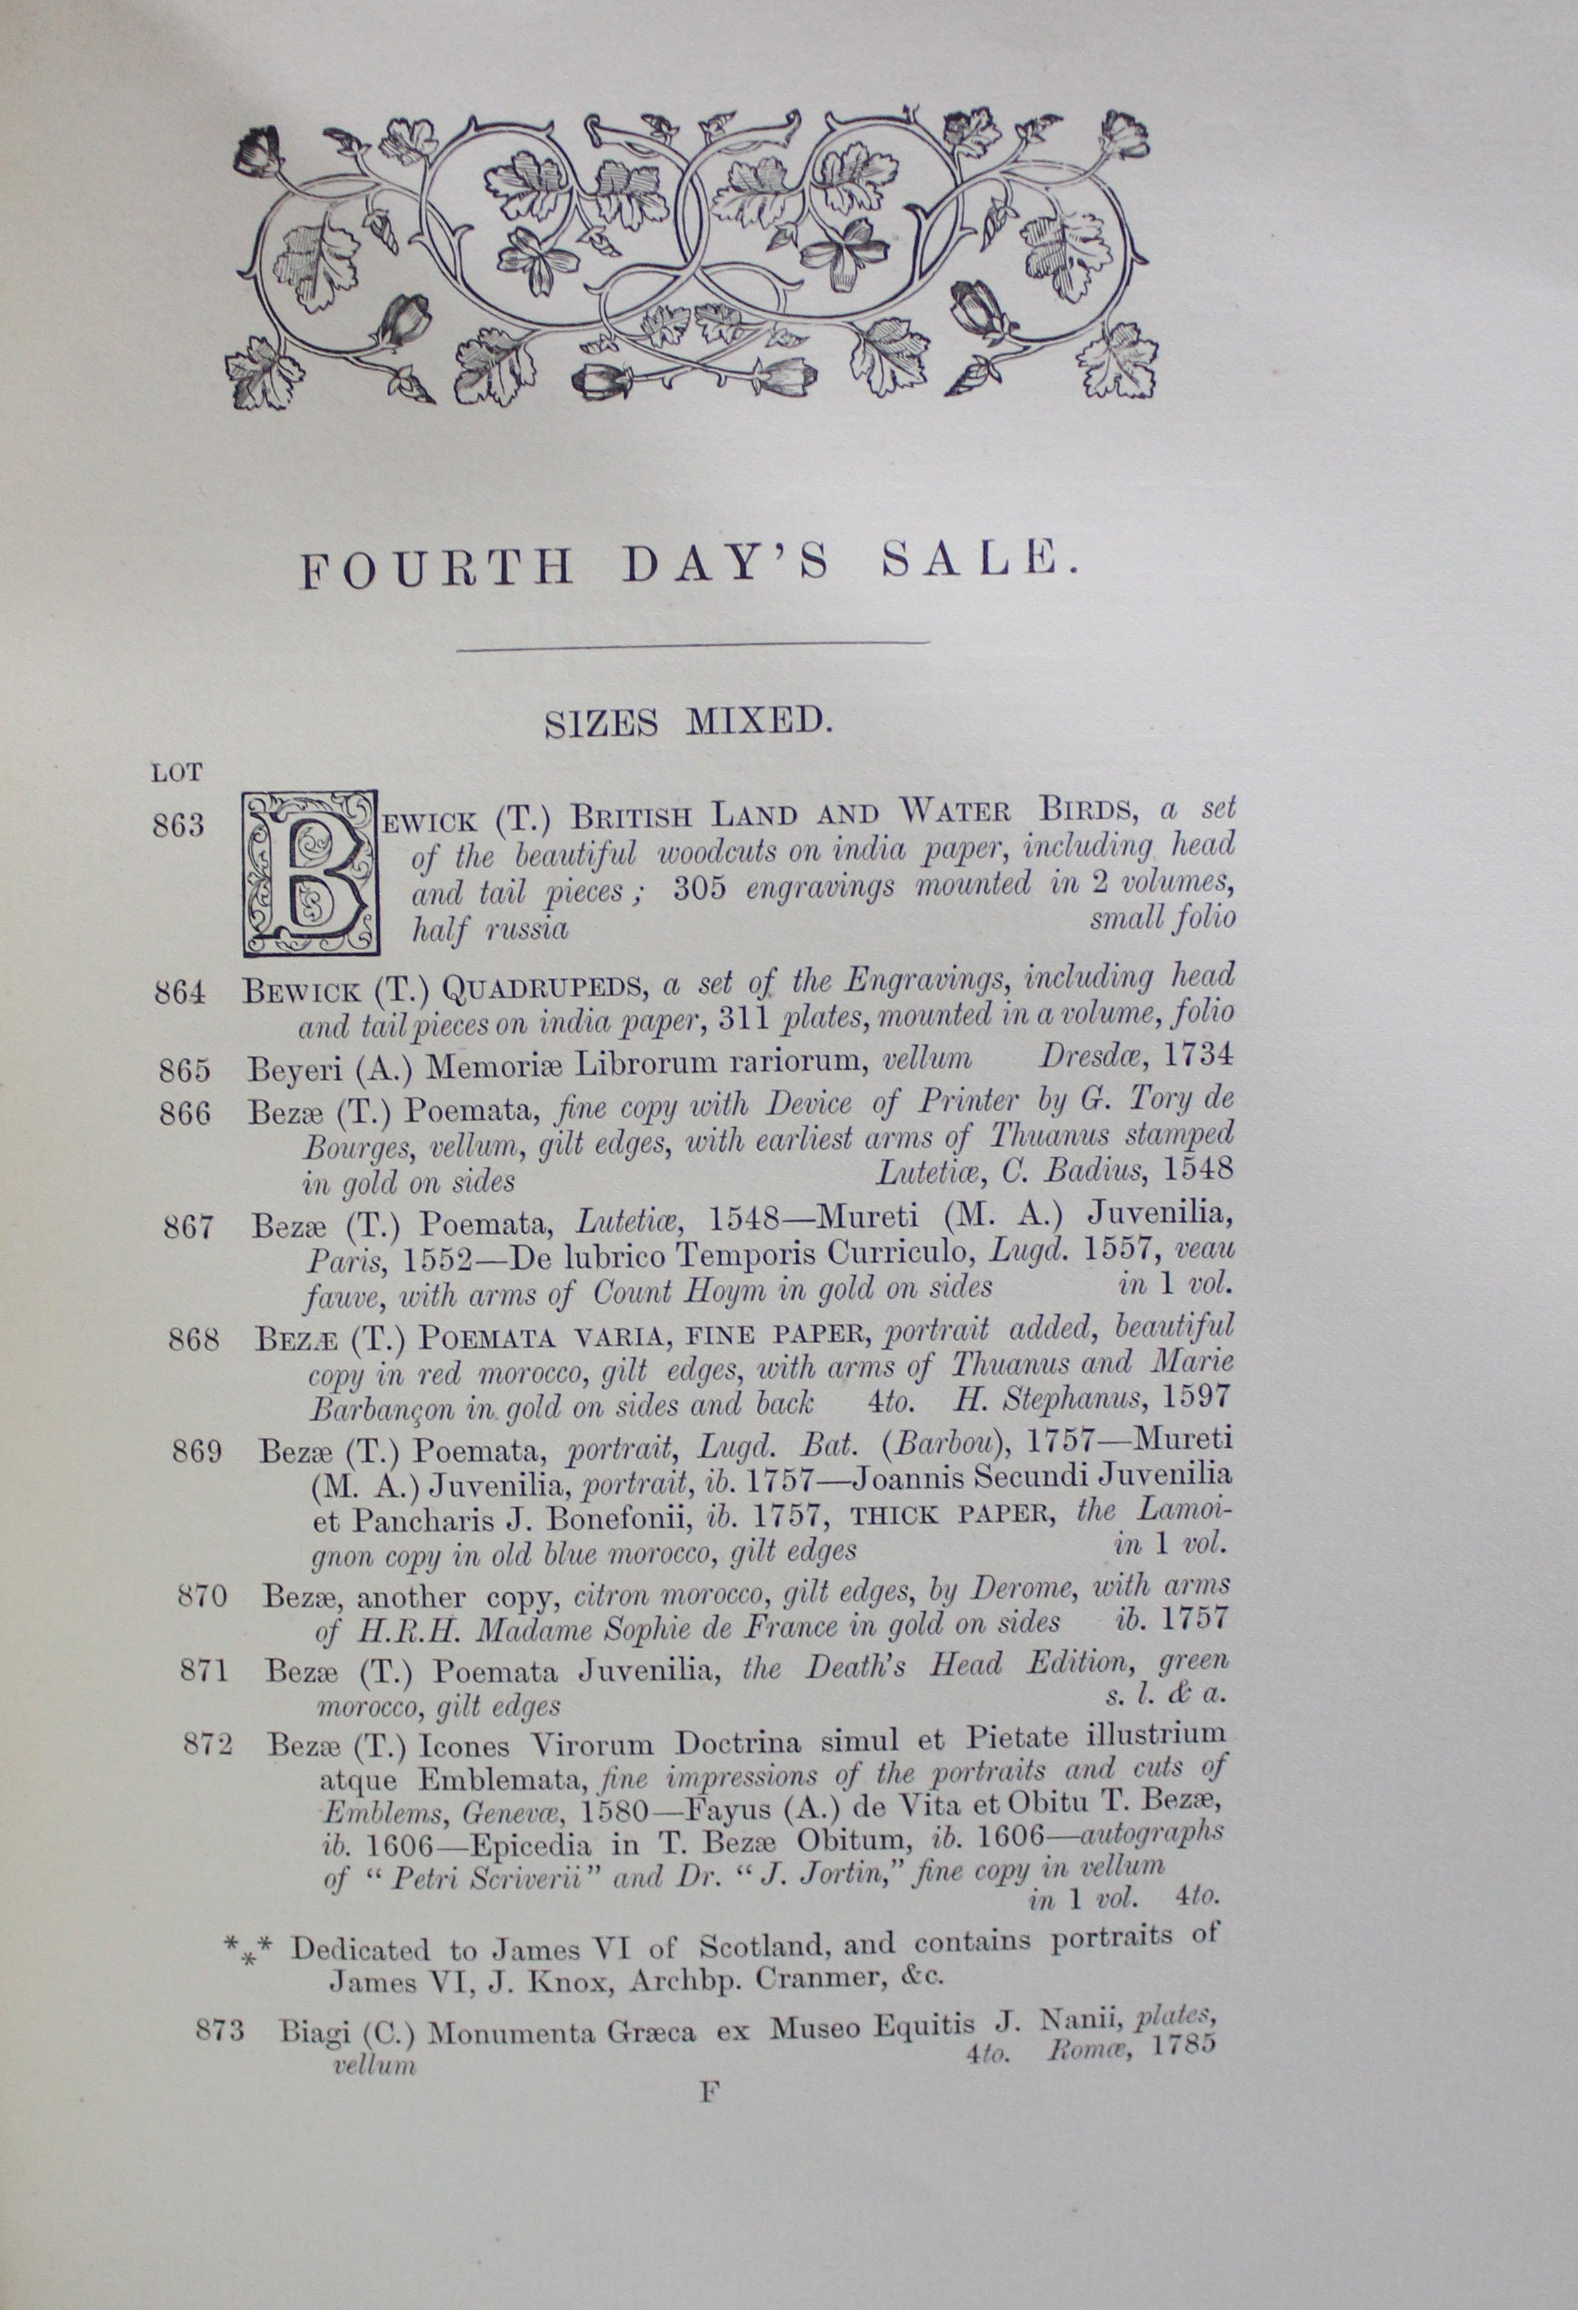 THE HAMILTON PALACE LIBRARIES, the auction catalogues of THE BECKFORD LIBRARY removed from - Image 4 of 4